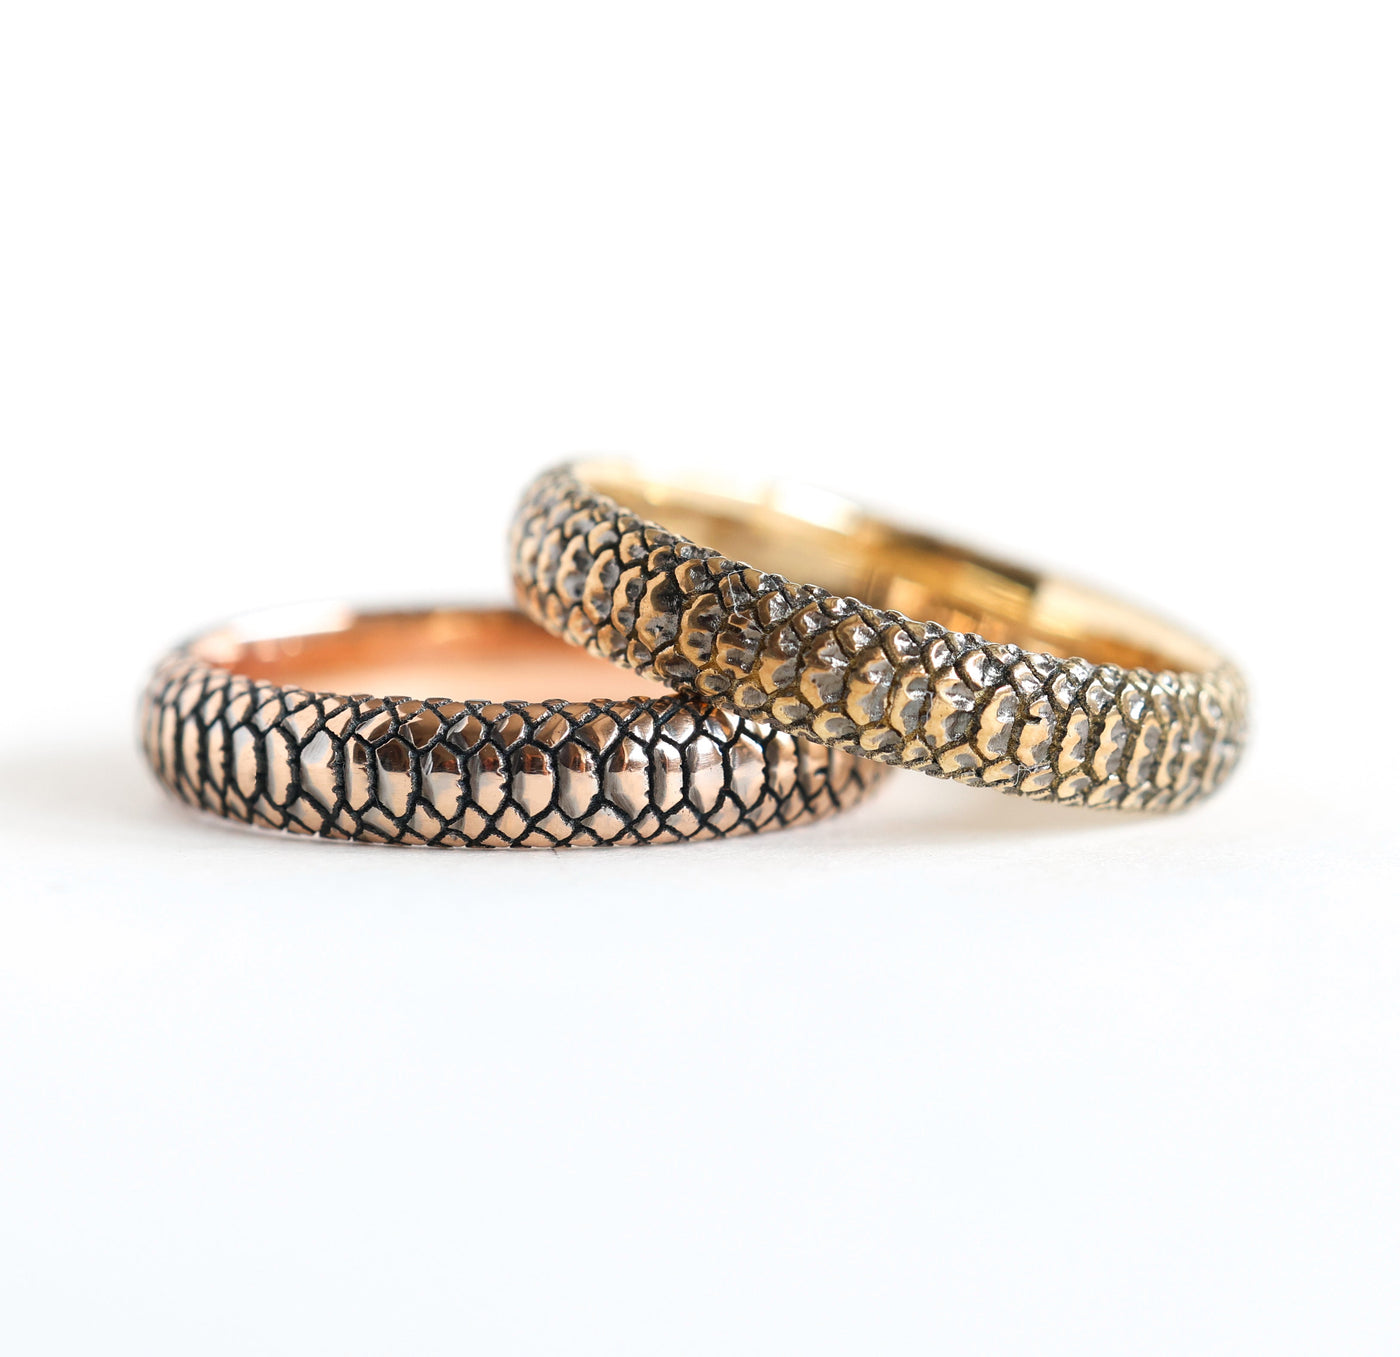 Close-up of a unique rose gold snake band ring, featuring snake textured design. Crafted in 14k or 18k gold.